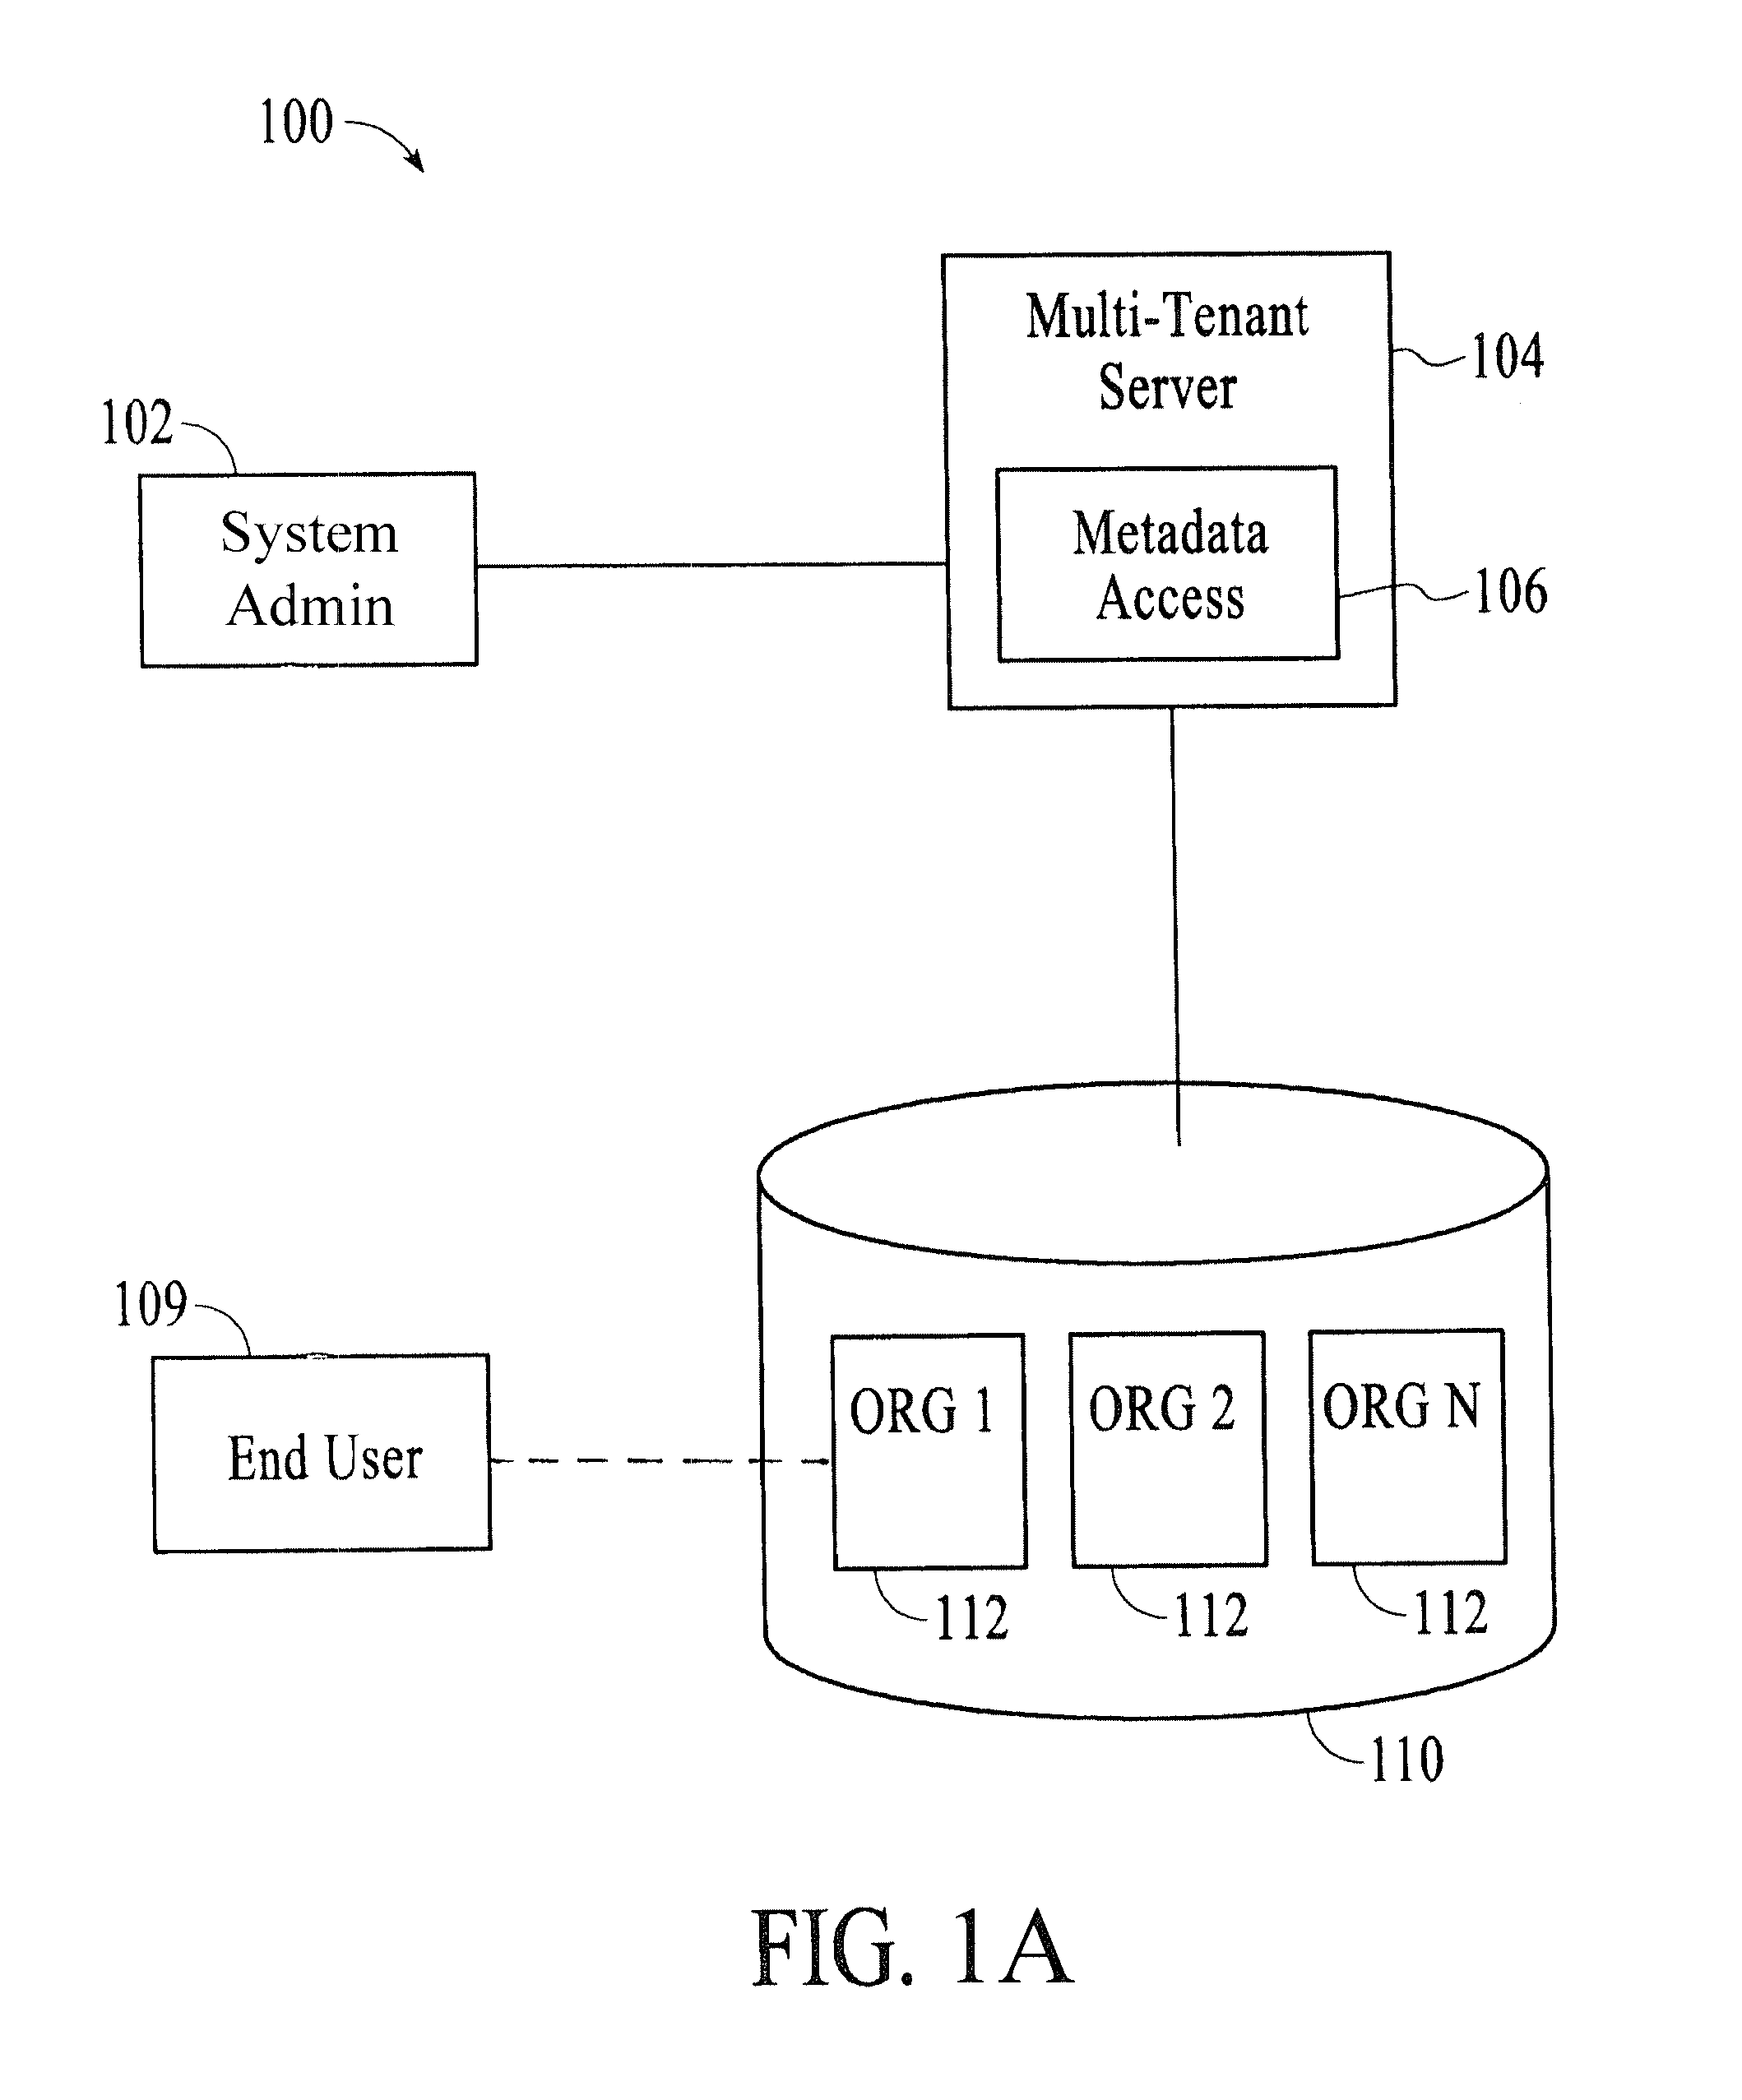 Methods and systems for provisioning access to customer organization data in a multi-tenant system